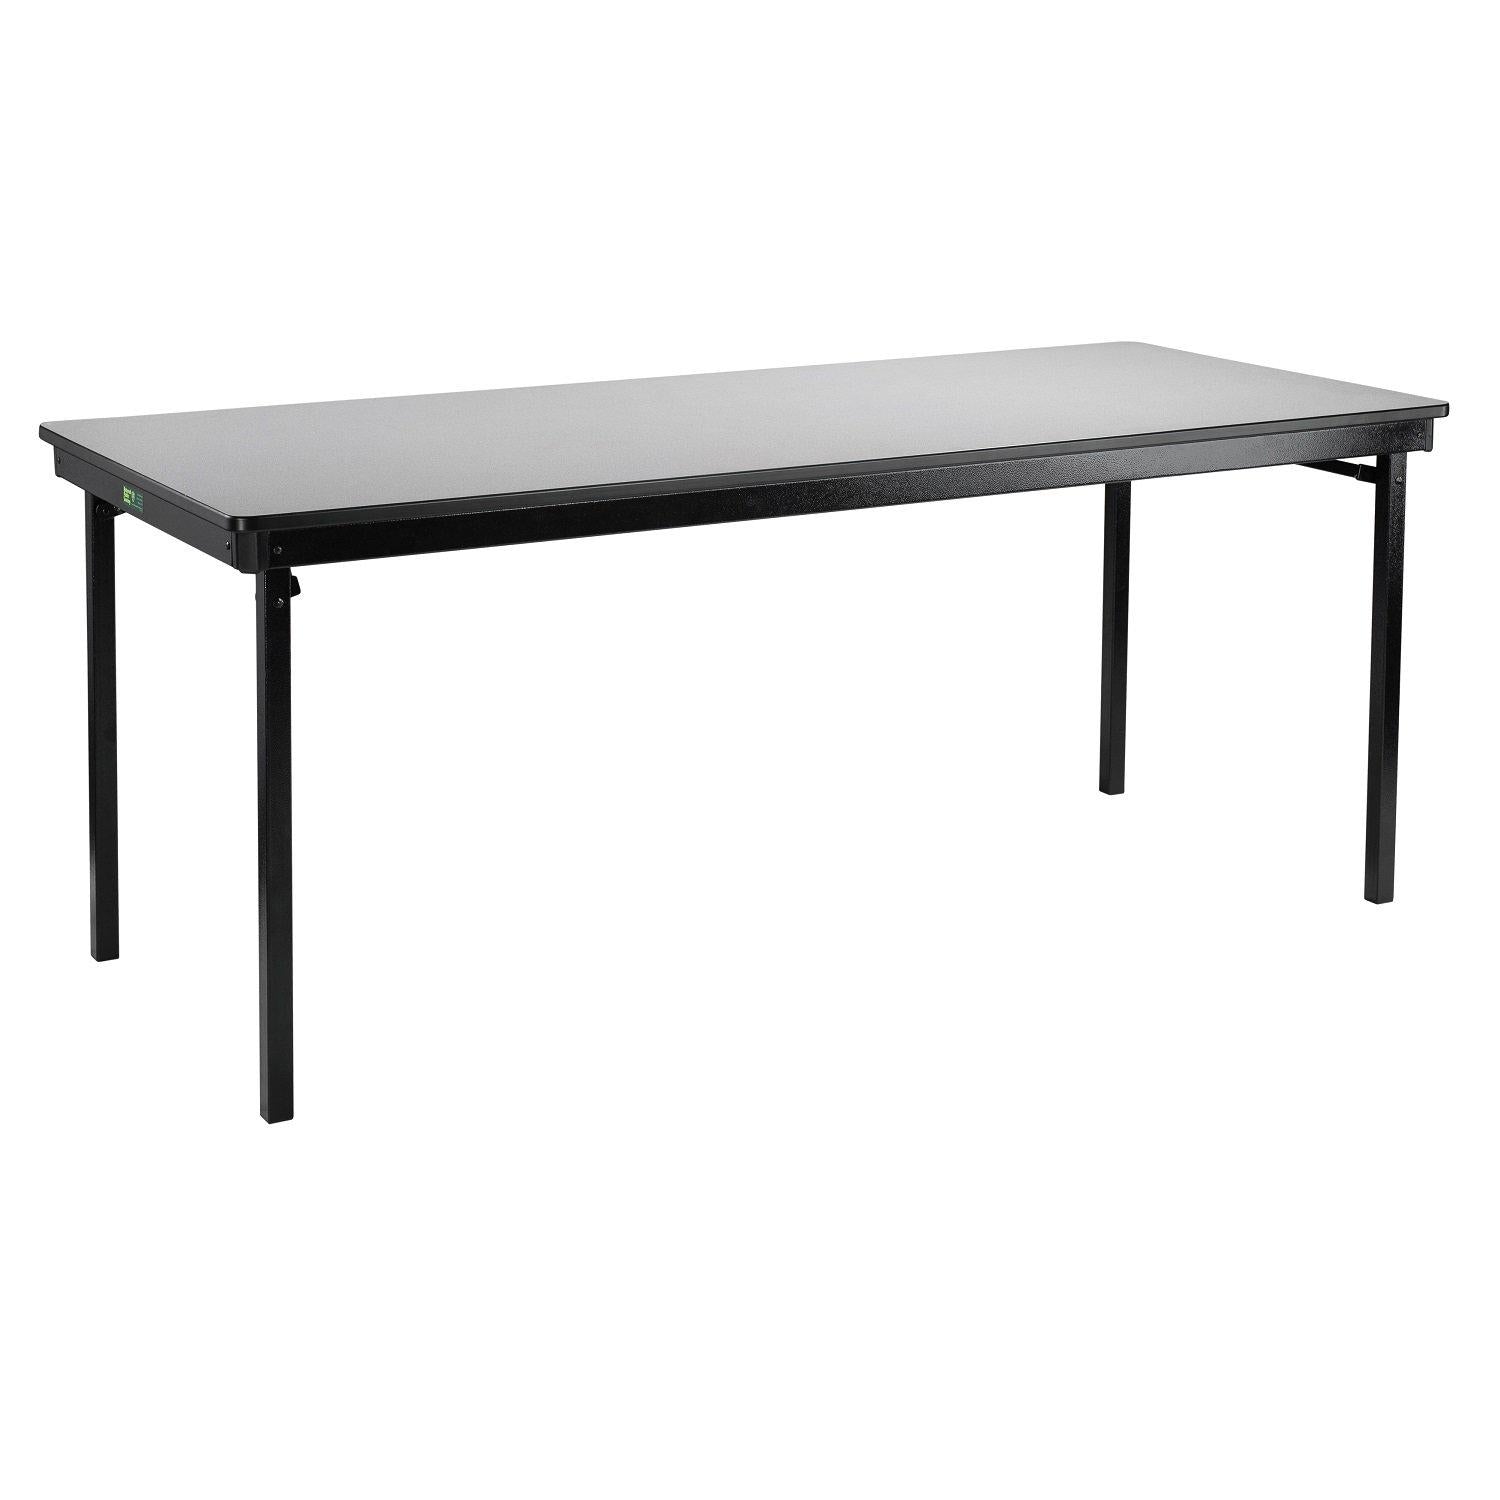 Max Seating Folding Table, 30" x 96", Premium Plywood Core, High Pressure Laminate Top with T-Mold Edging